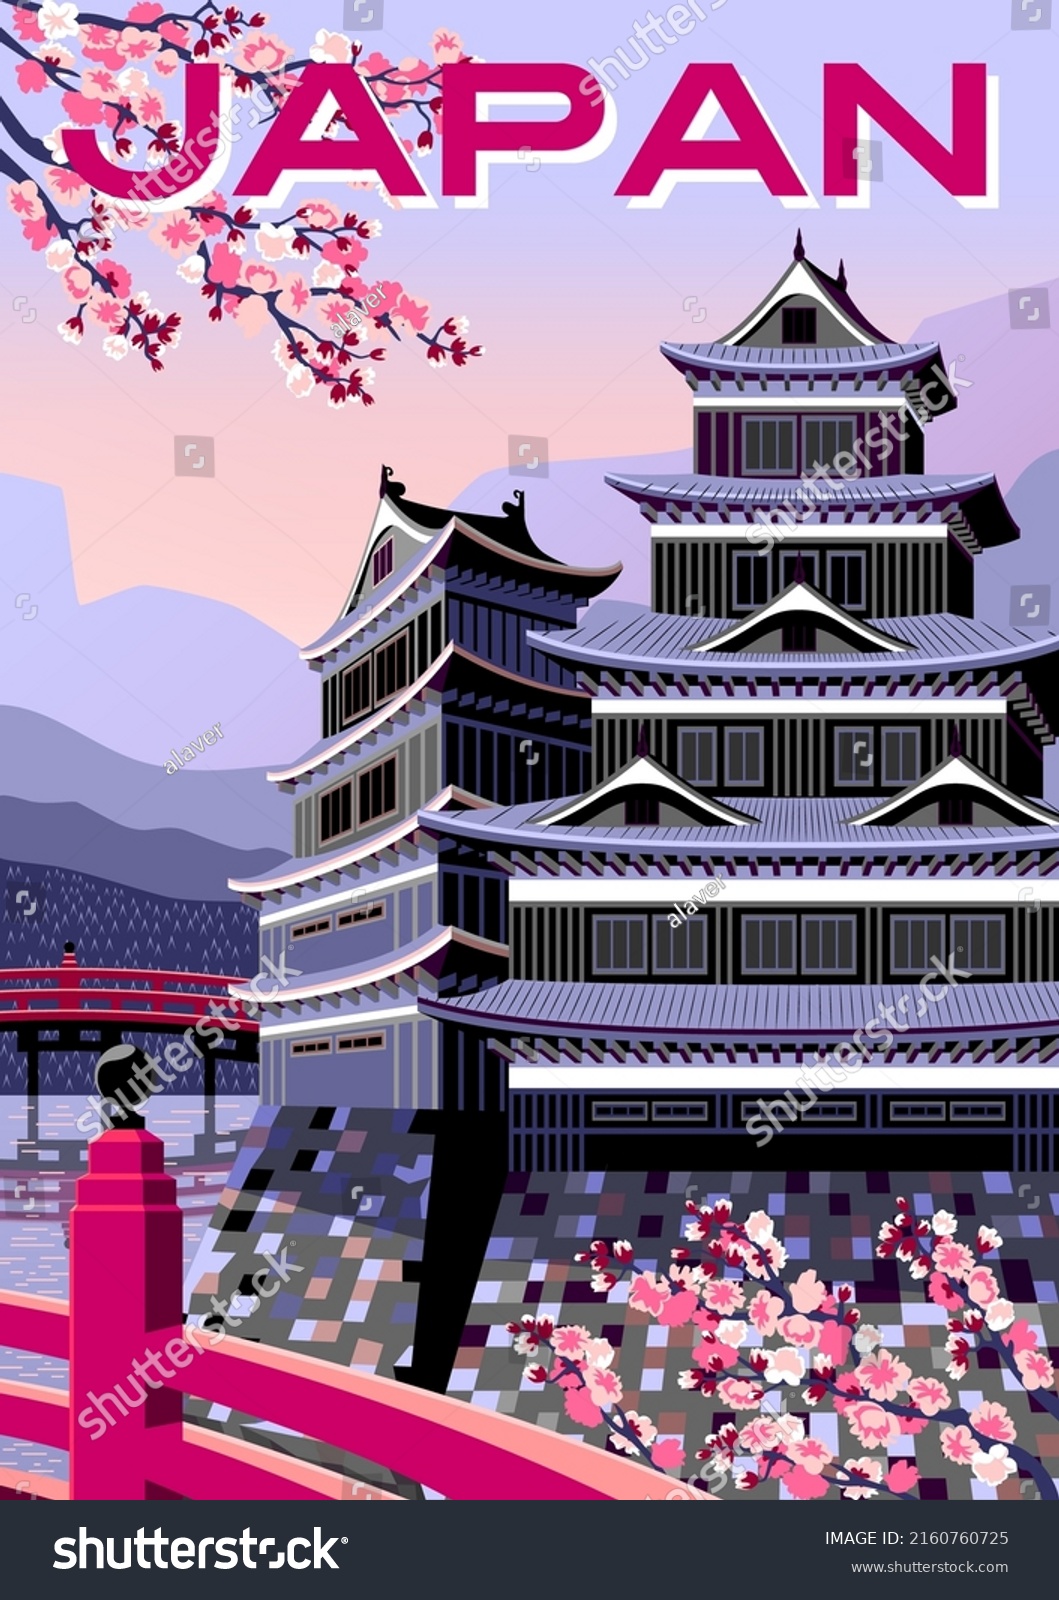 SVG of Japan Travel Poster with a bridge, cherry blossoms and an ancient castle and mountains in the background. Handmade drawing vector illustration. Flat design. Vintage style.  svg